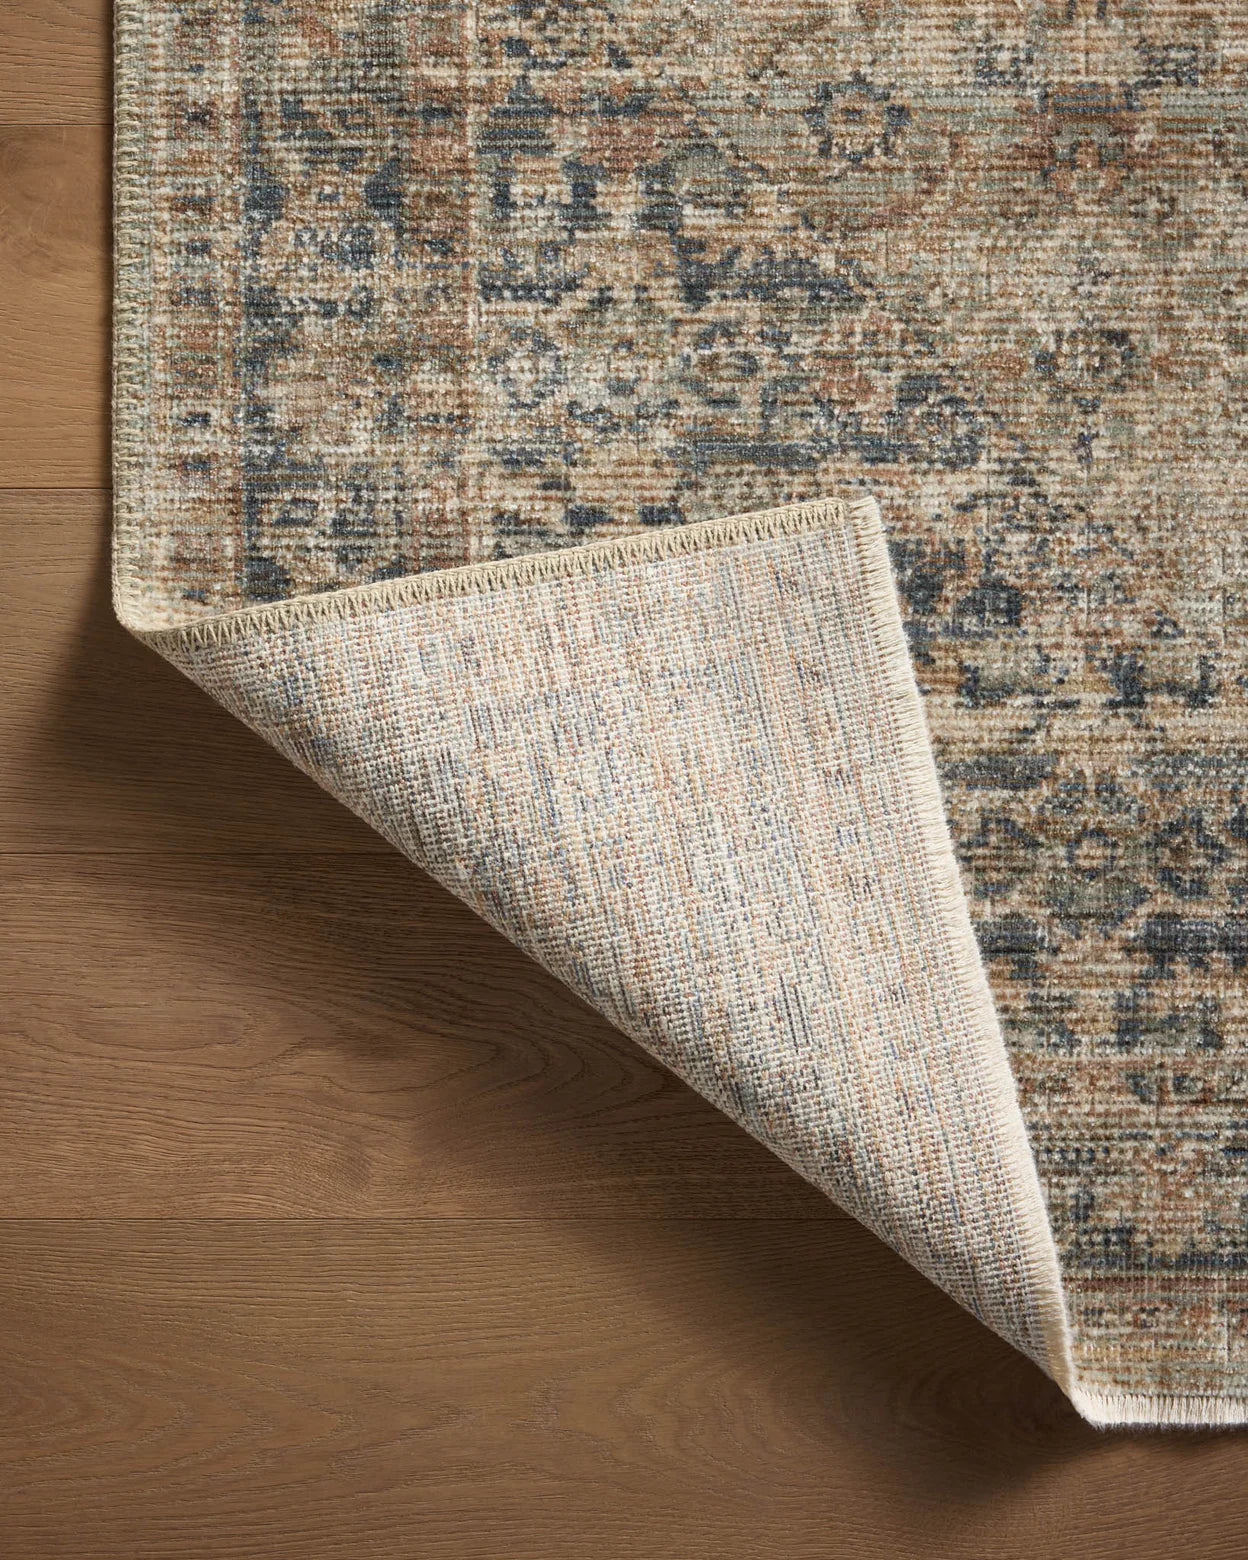 A corner of a decorative area rug in a Scottsdale bungalow is flipped back to reveal its underside on a wooden floor, showcasing a detailed, multicolored pattern on the top surface of the Sage / Navy Rug by Loloi Rugs.